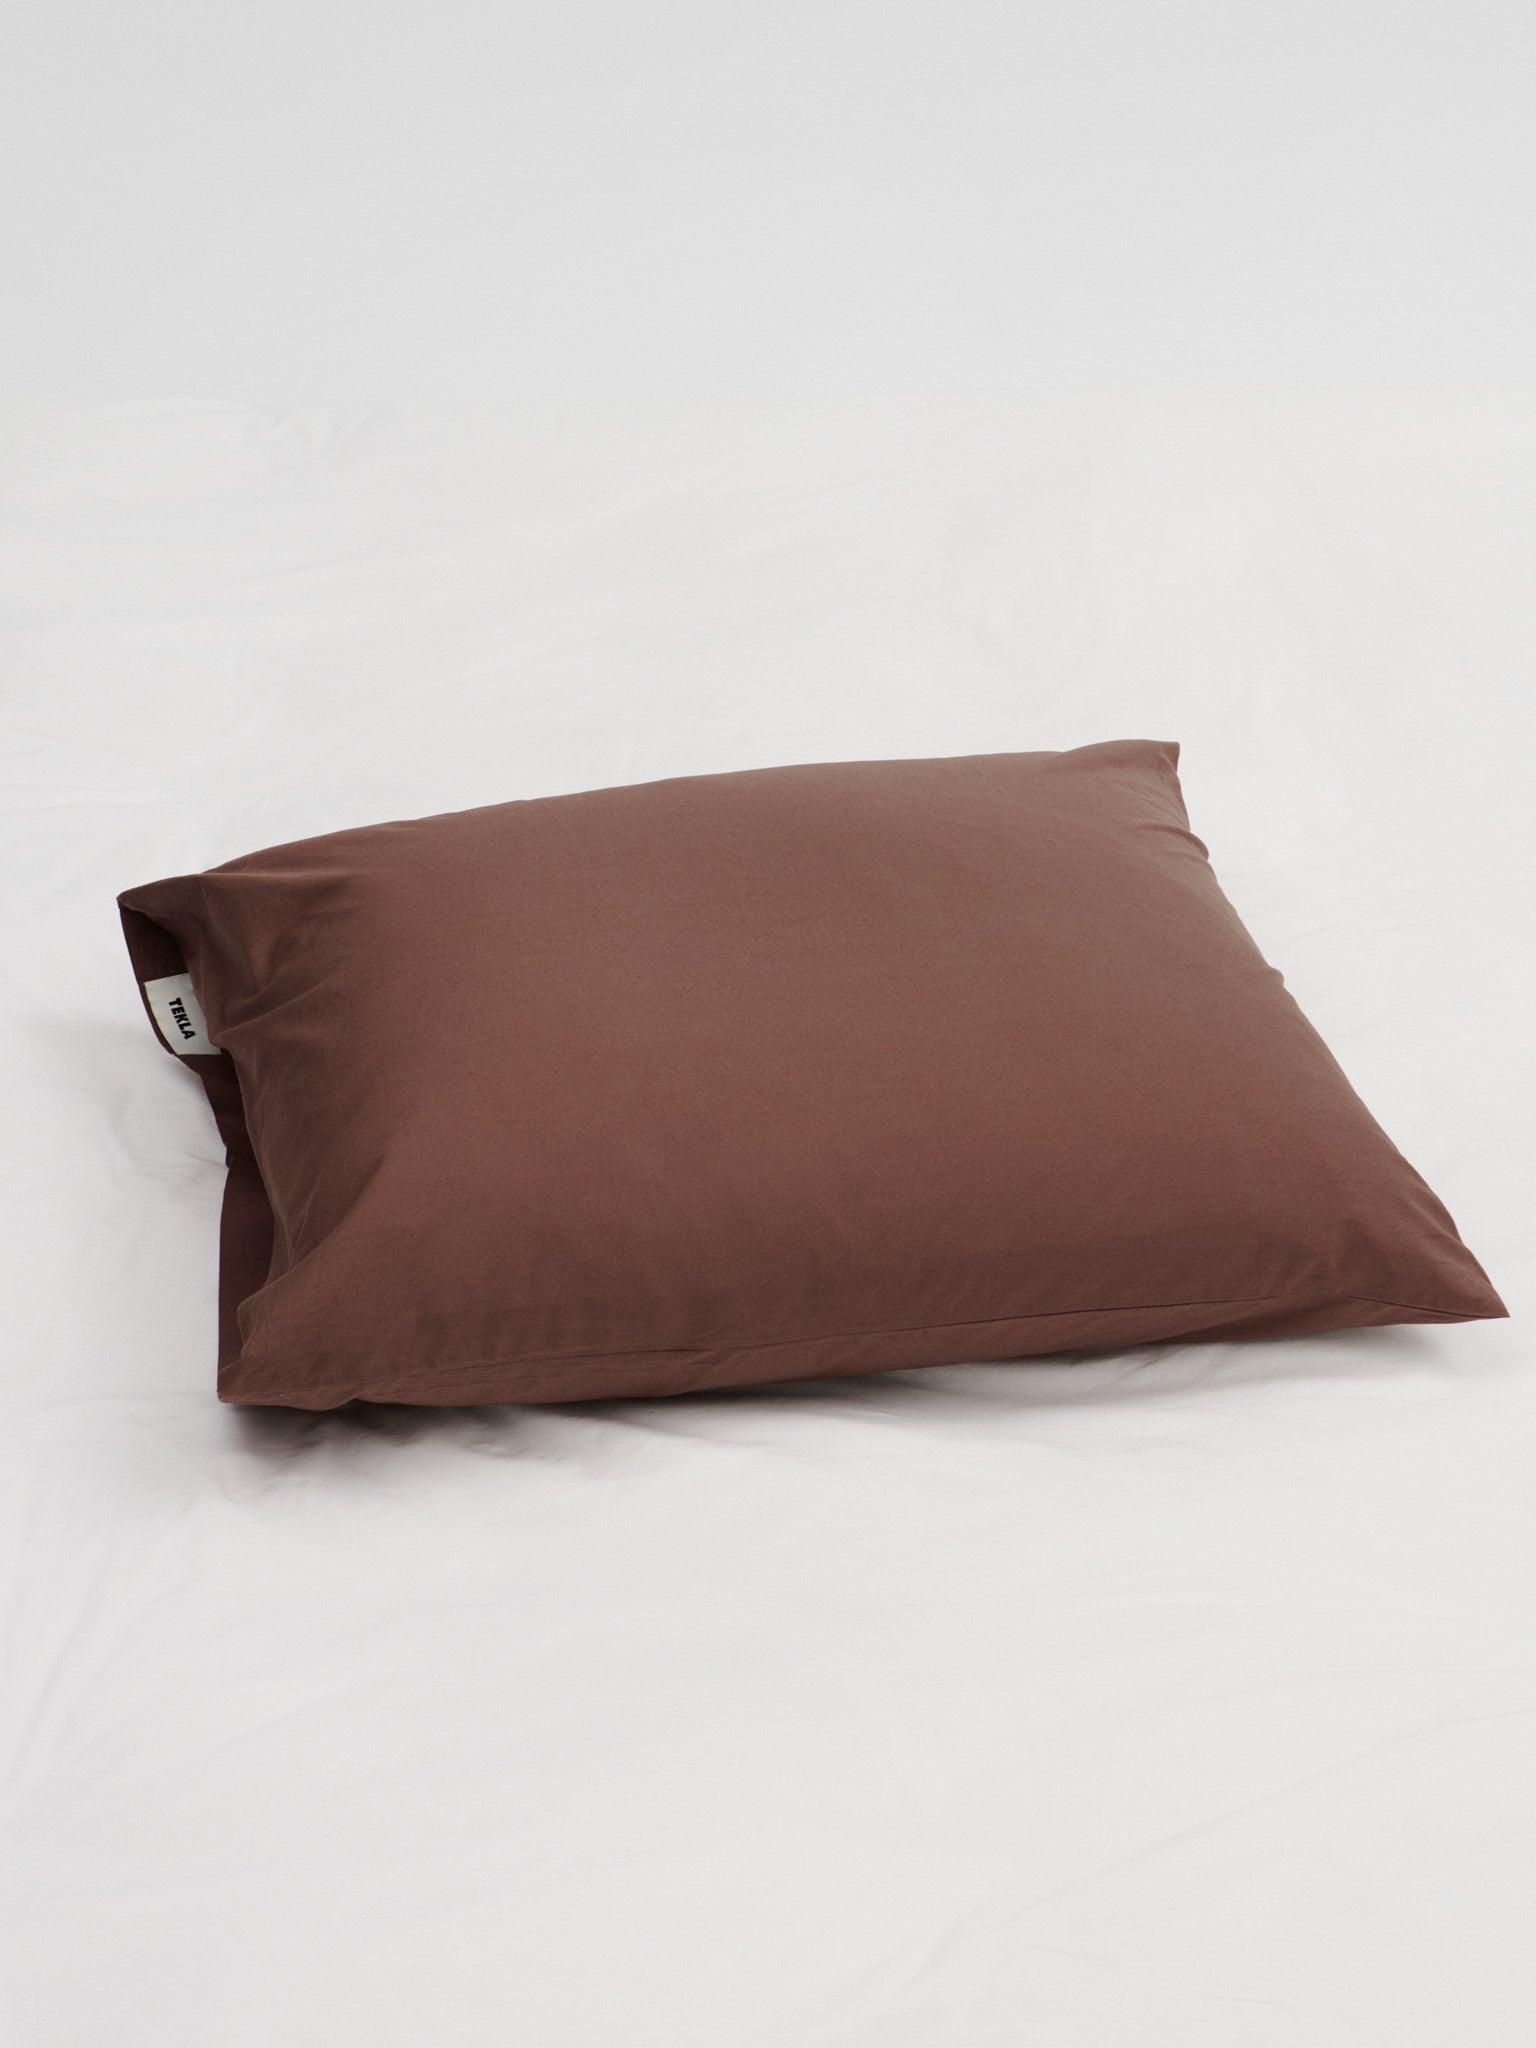 Tekla - Percale Pillow Sham in Cocoa Brown